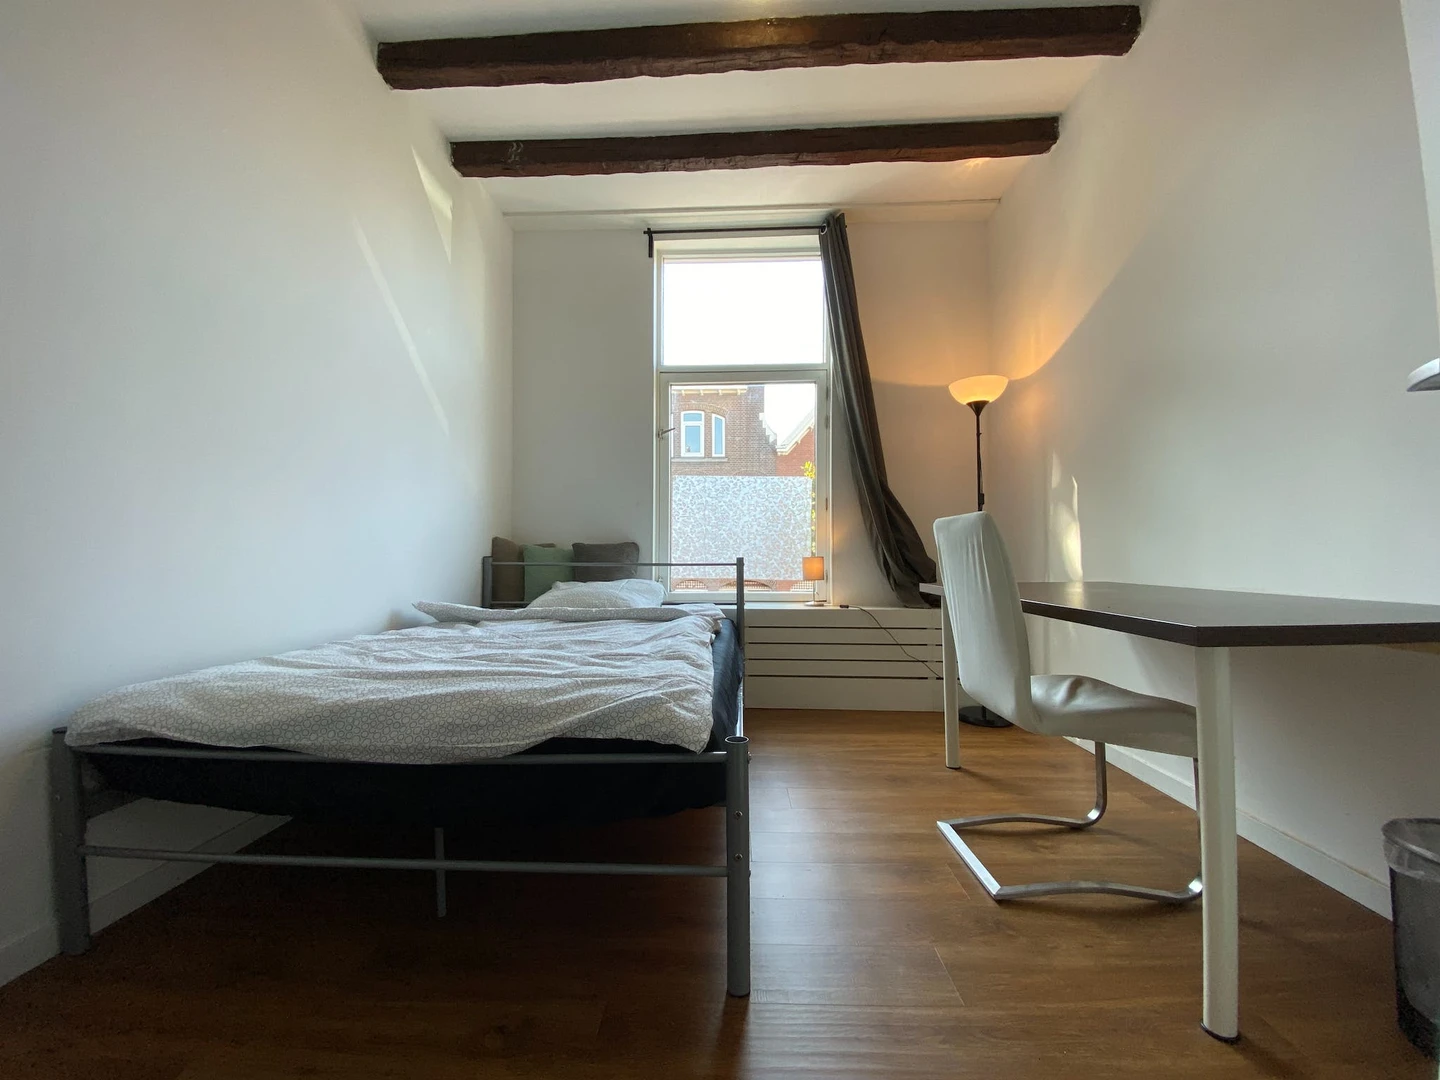 Room for rent in a shared flat in rotterdam